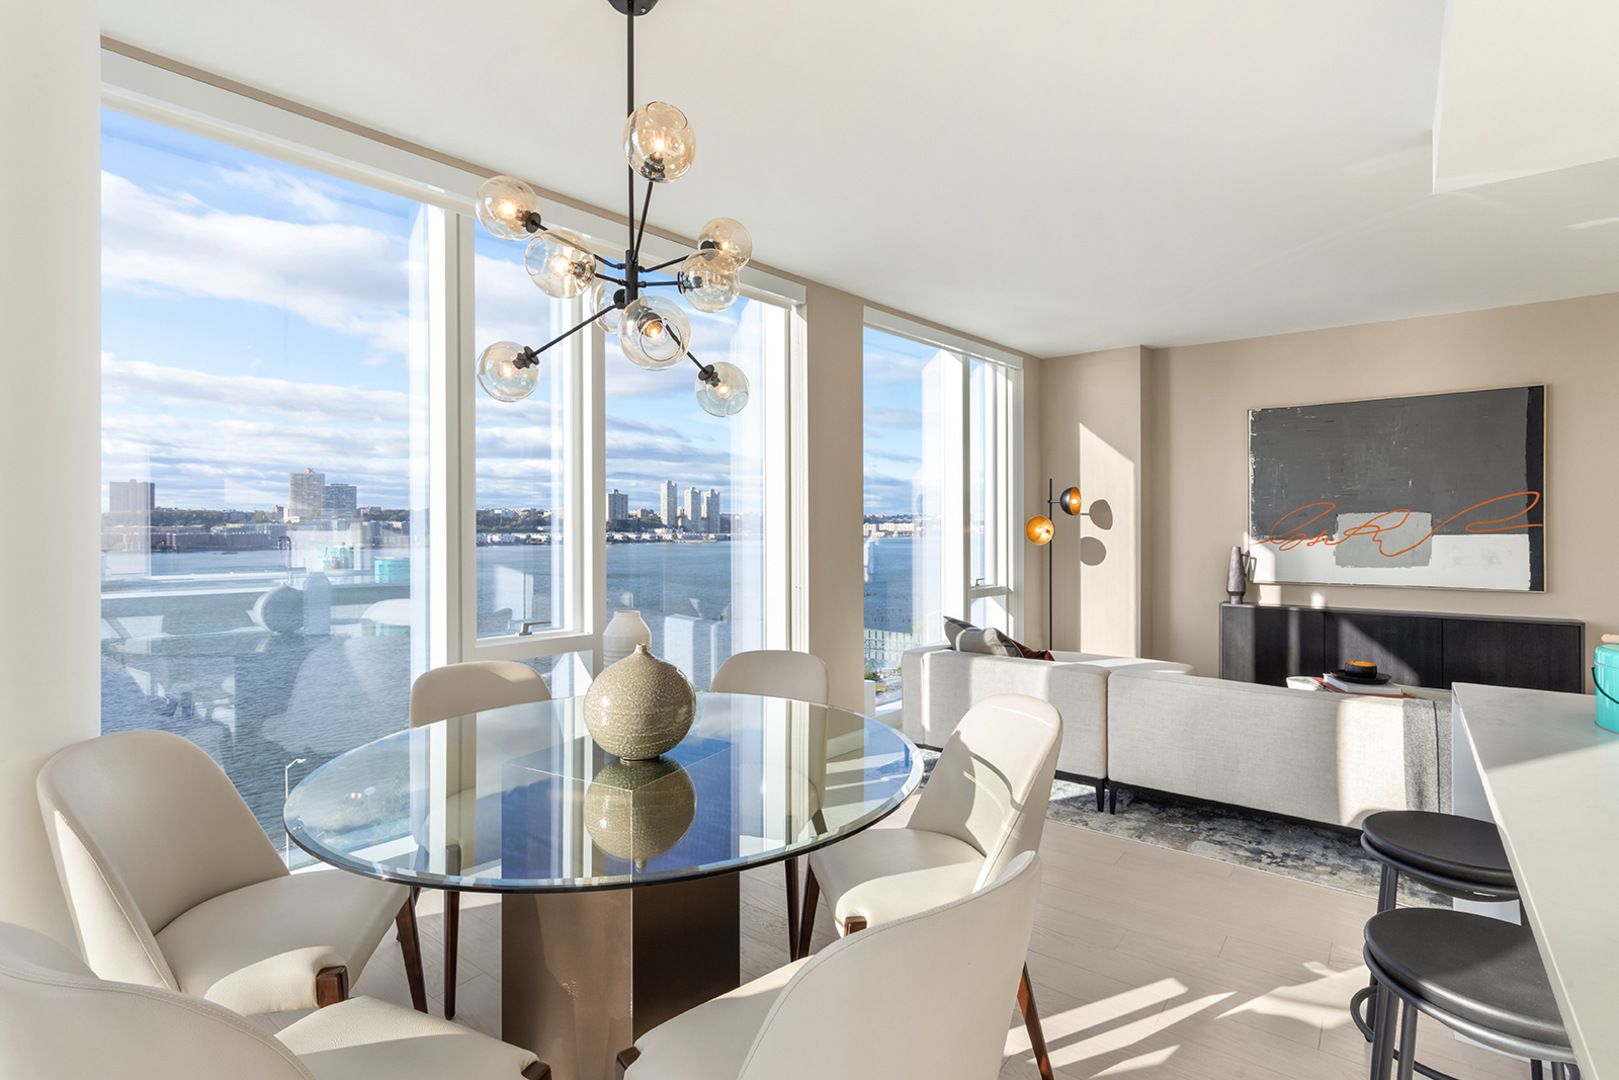 Bright and modern dining area with a glass table and leather chairs, boasting an elegant chandelier and panoramic views of the waterfront through floor-to-ceiling windows.